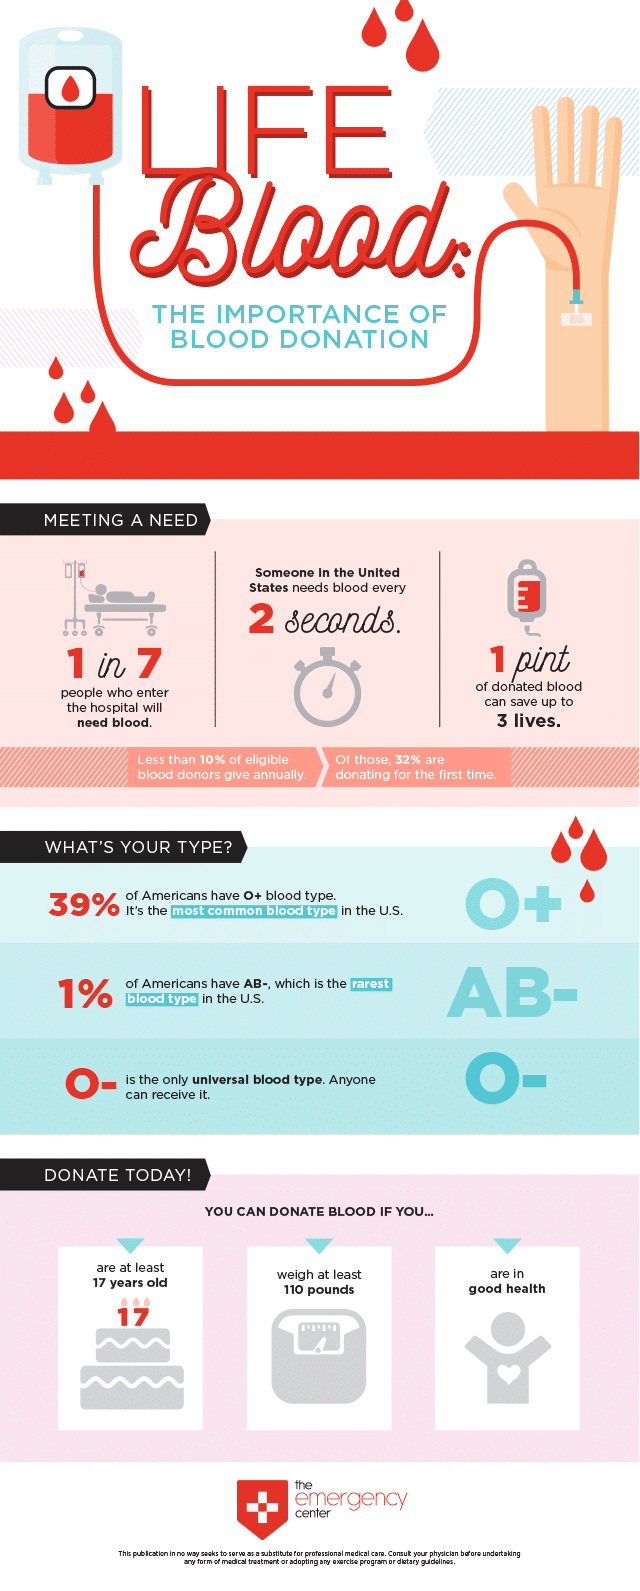 The Importance of Blood Donation